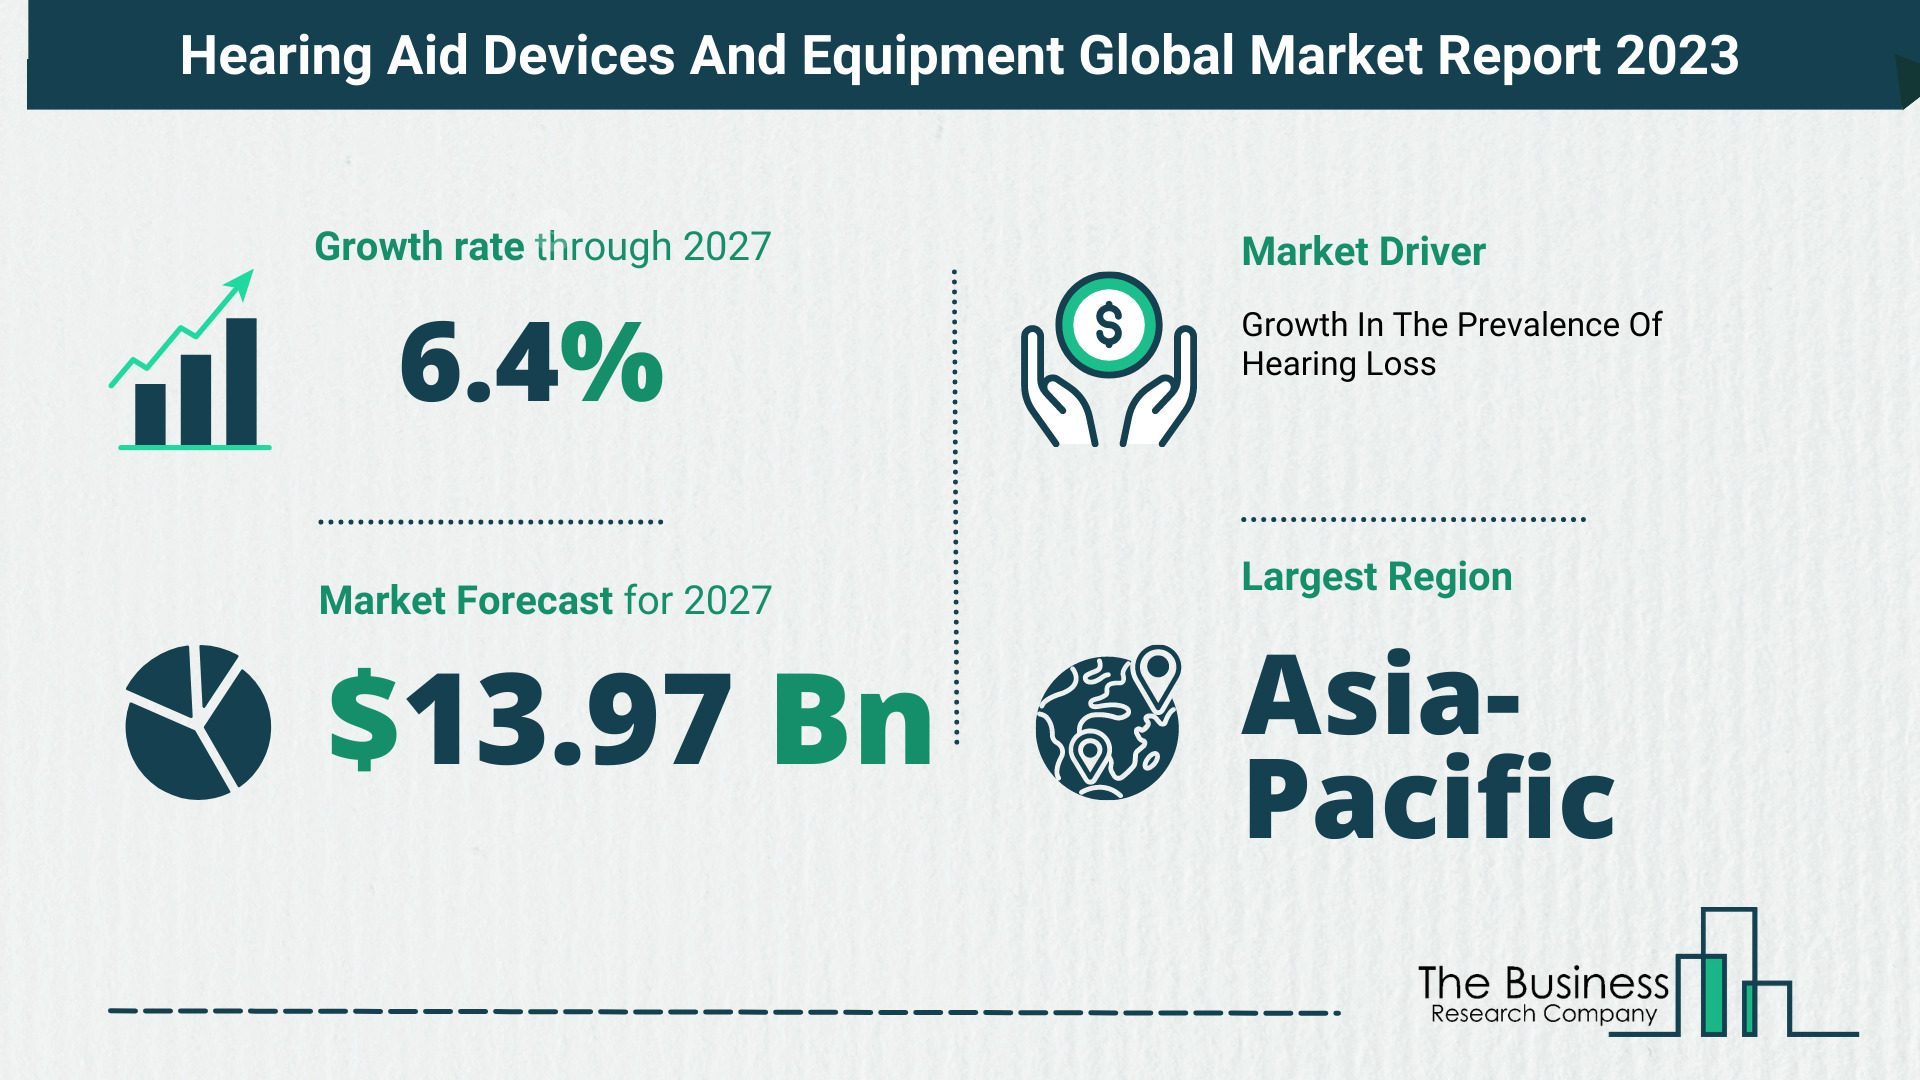 How Will The Hearing Aid Devices And Equipment Market Size Grow In The Coming Years?